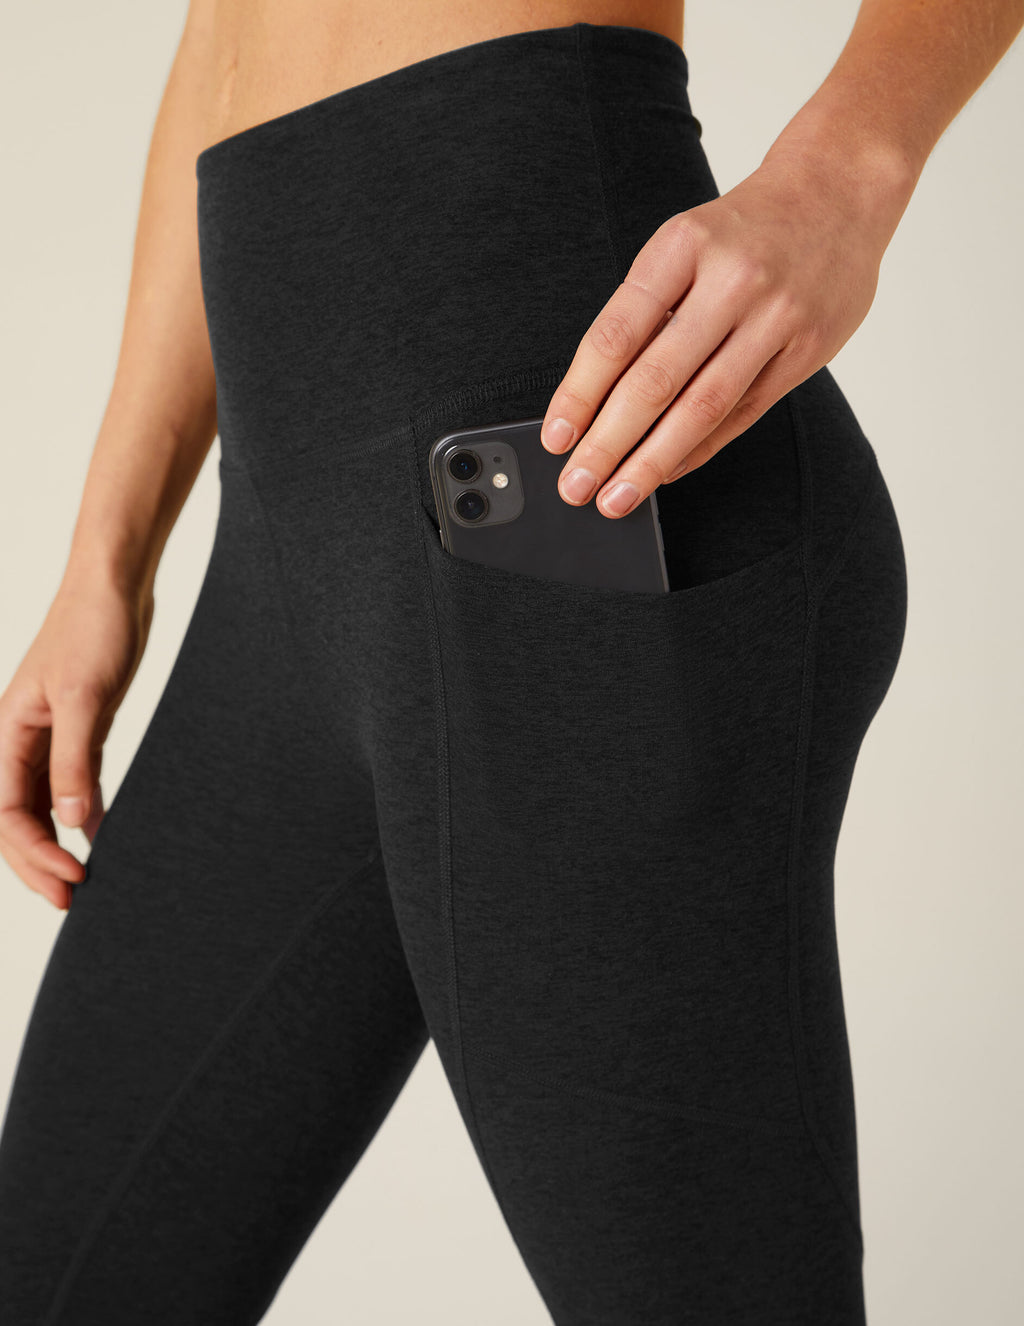 SMENG Athletic Yoga Pants with Pockets for Ladies Petite